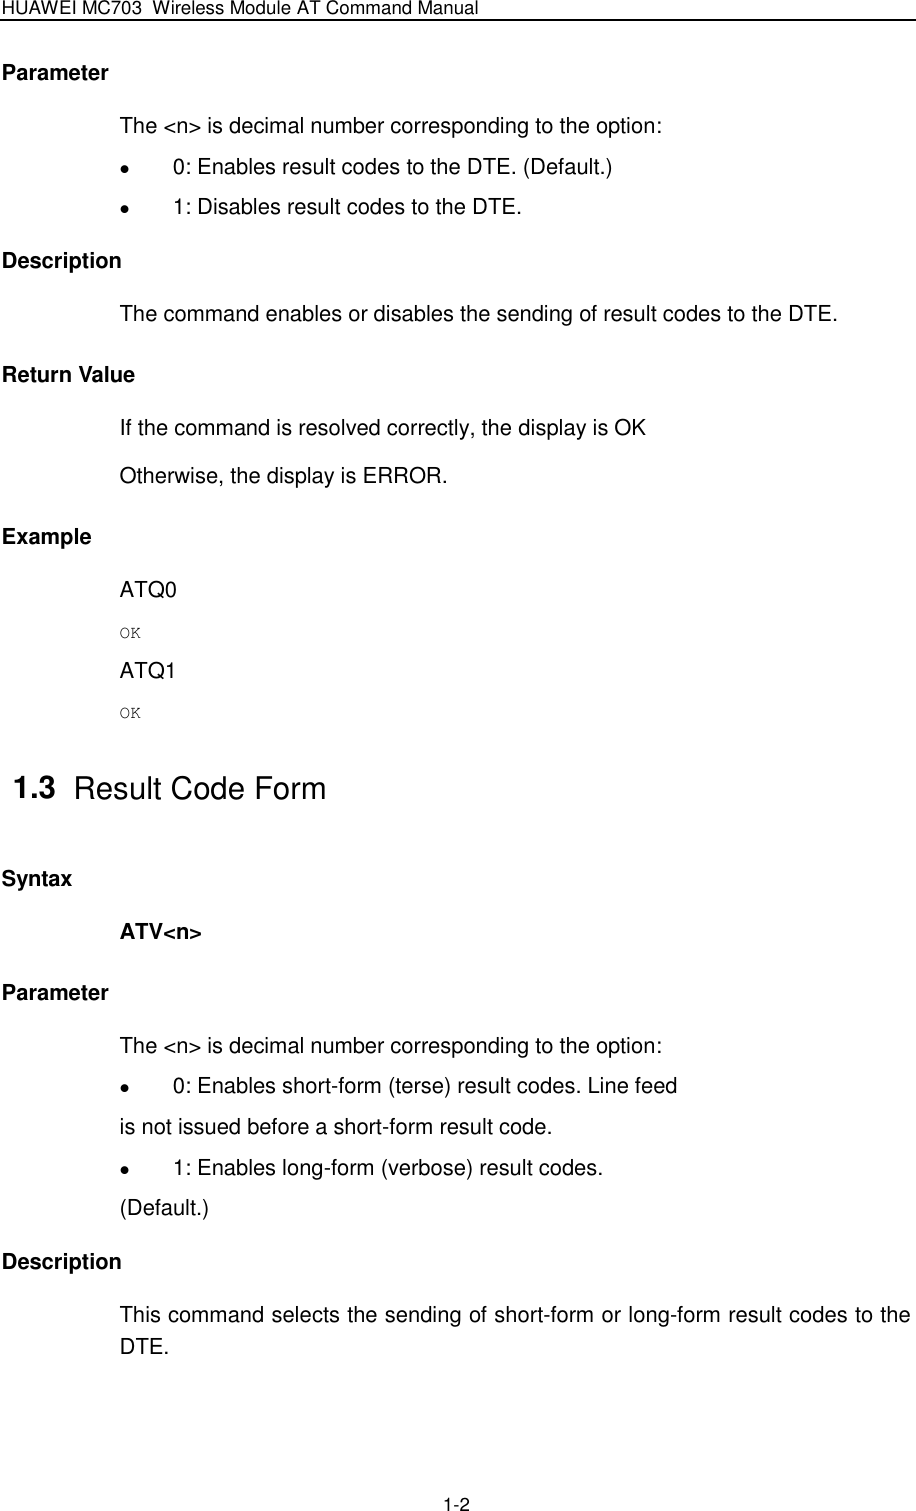 HUAWEI MC703 Wireless Module AT Command Manual   1-2 Parameter The &lt;n&gt; is decimal number corresponding to the option:    0: Enables result codes to the DTE. (Default.)  1: Disables result codes to the DTE. Description The command enables or disables the sending of result codes to the DTE. Return Value If the command is resolved correctly, the display is OK Otherwise, the display is ERROR. Example ATQ0 OK ATQ1 OK 1.3  Result Code Form Syntax ATV&lt;n&gt; Parameter The &lt;n&gt; is decimal number corresponding to the option:    0: Enables short-form (terse) result codes. Line feed is not issued before a short-form result code.  1: Enables long-form (verbose) result codes. (Default.) Description This command selects the sending of short-form or long-form result codes to the DTE. 